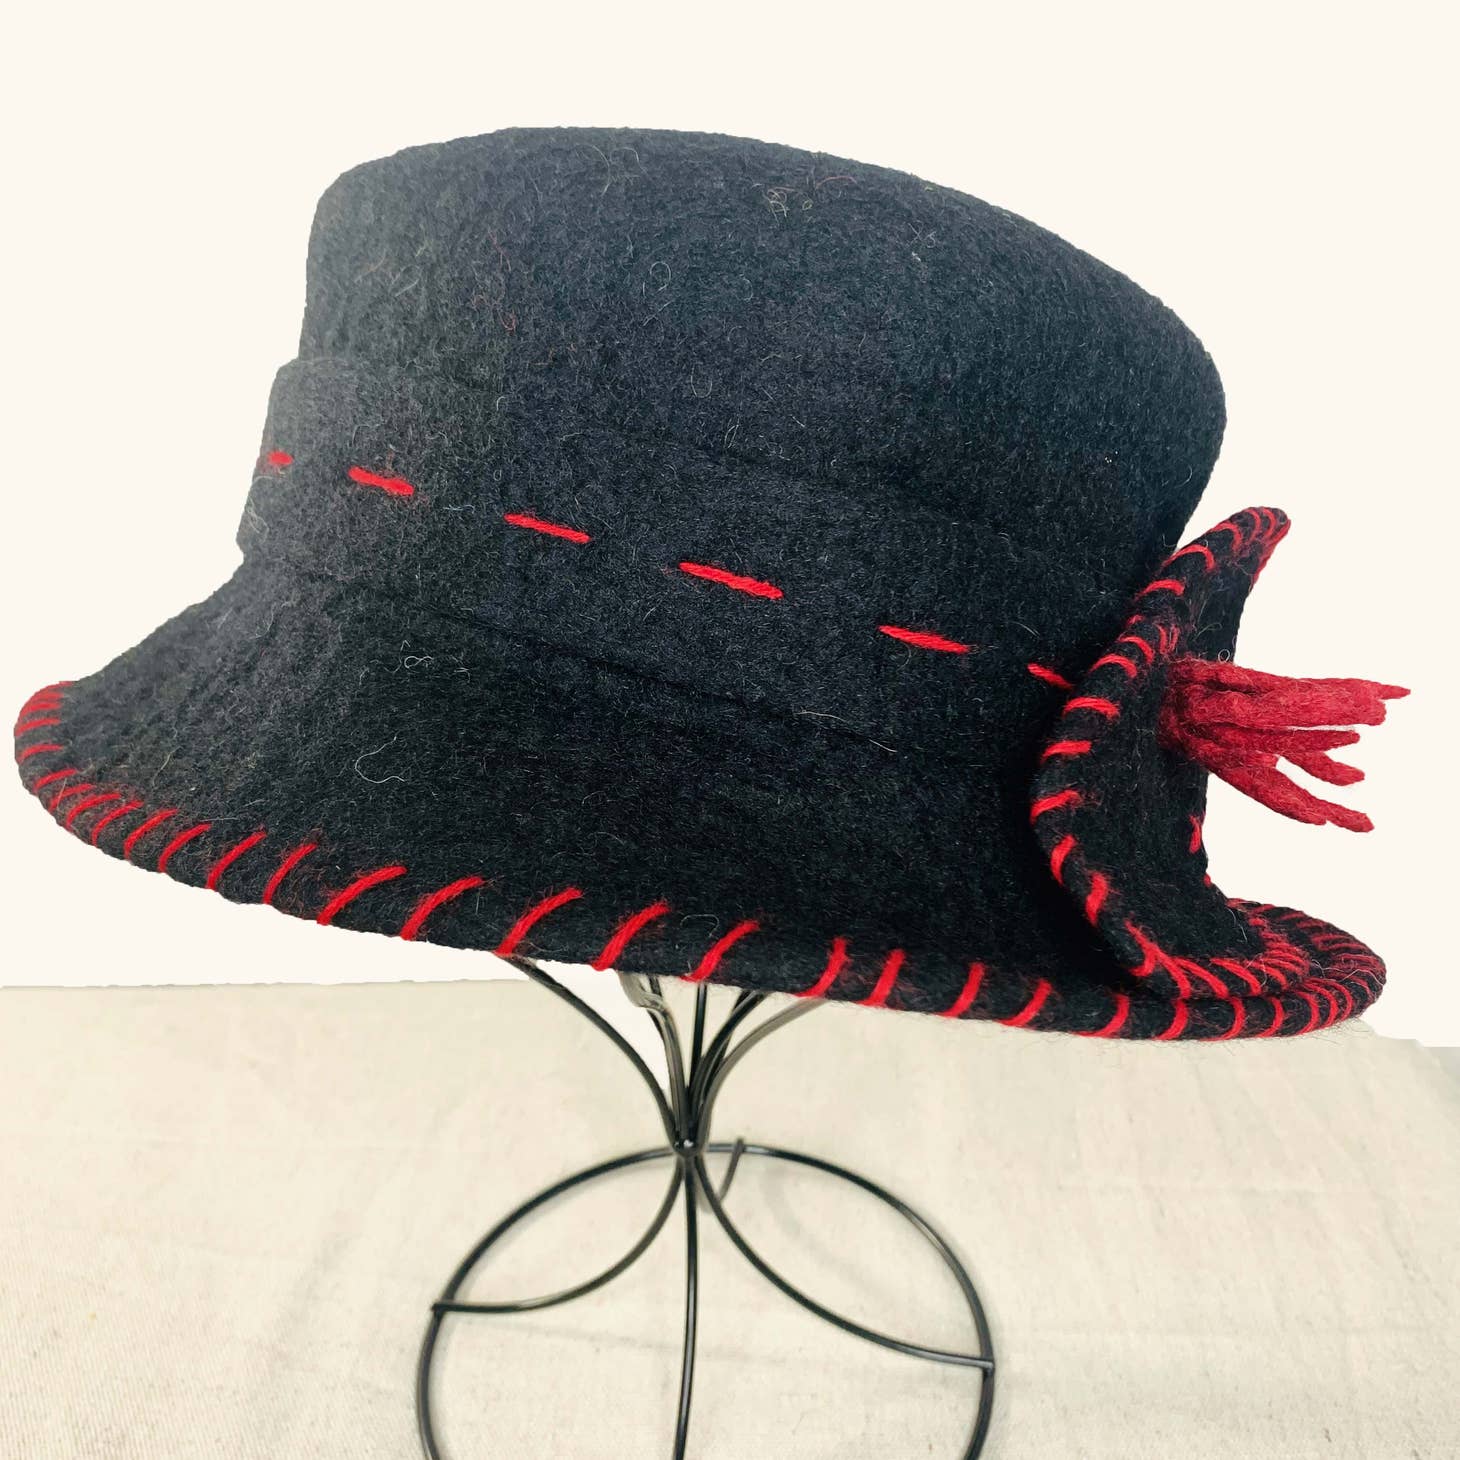 Boiled Wool Women's Hat, Black with Red Contrast